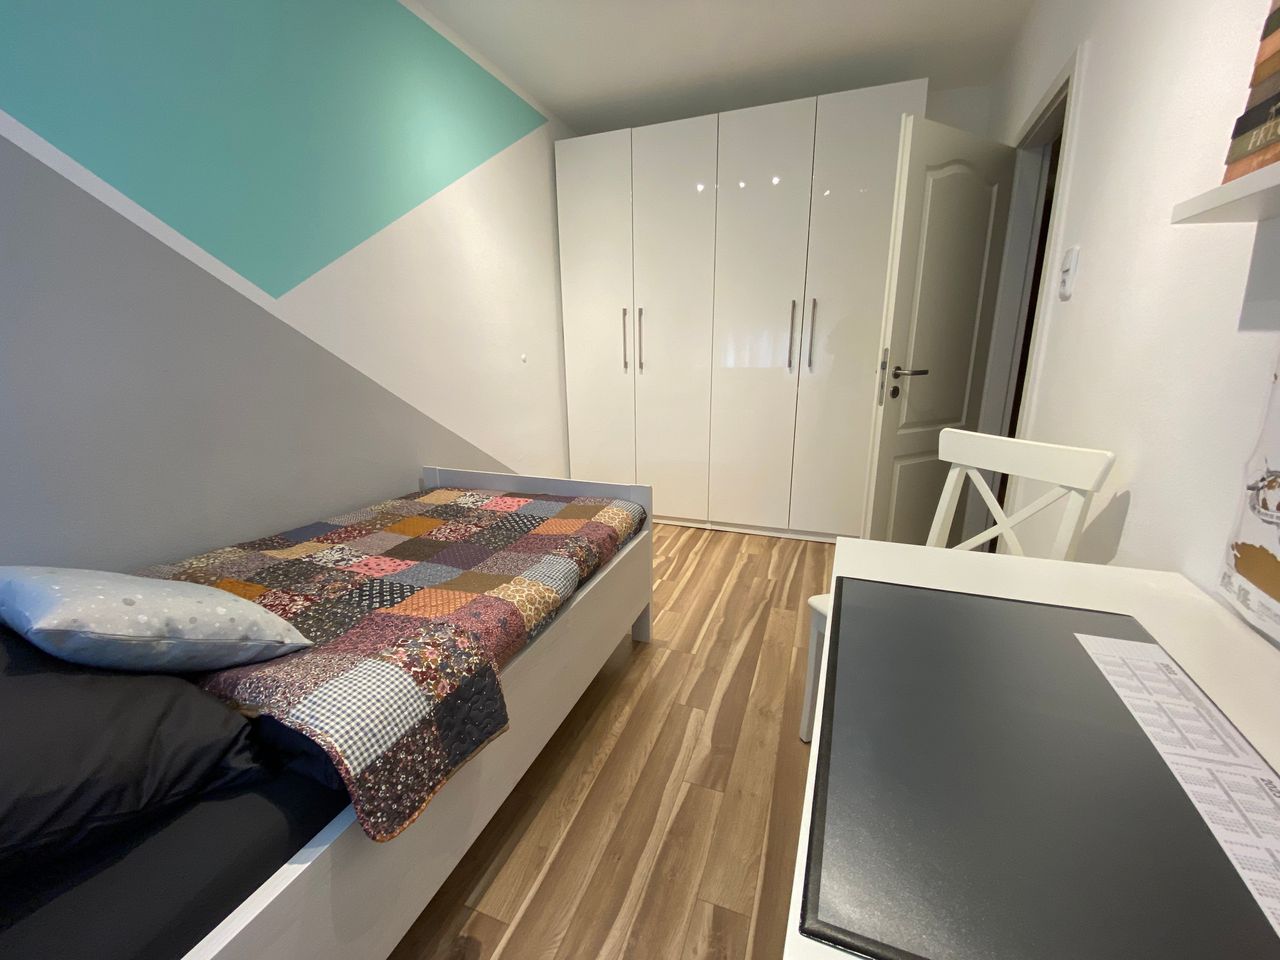 Beautiful Apartment in the Center of Opladen, Leverkusen. 5 min. walk to the train to reach  Cologne and/or Düsseldorf.   Ground floor.